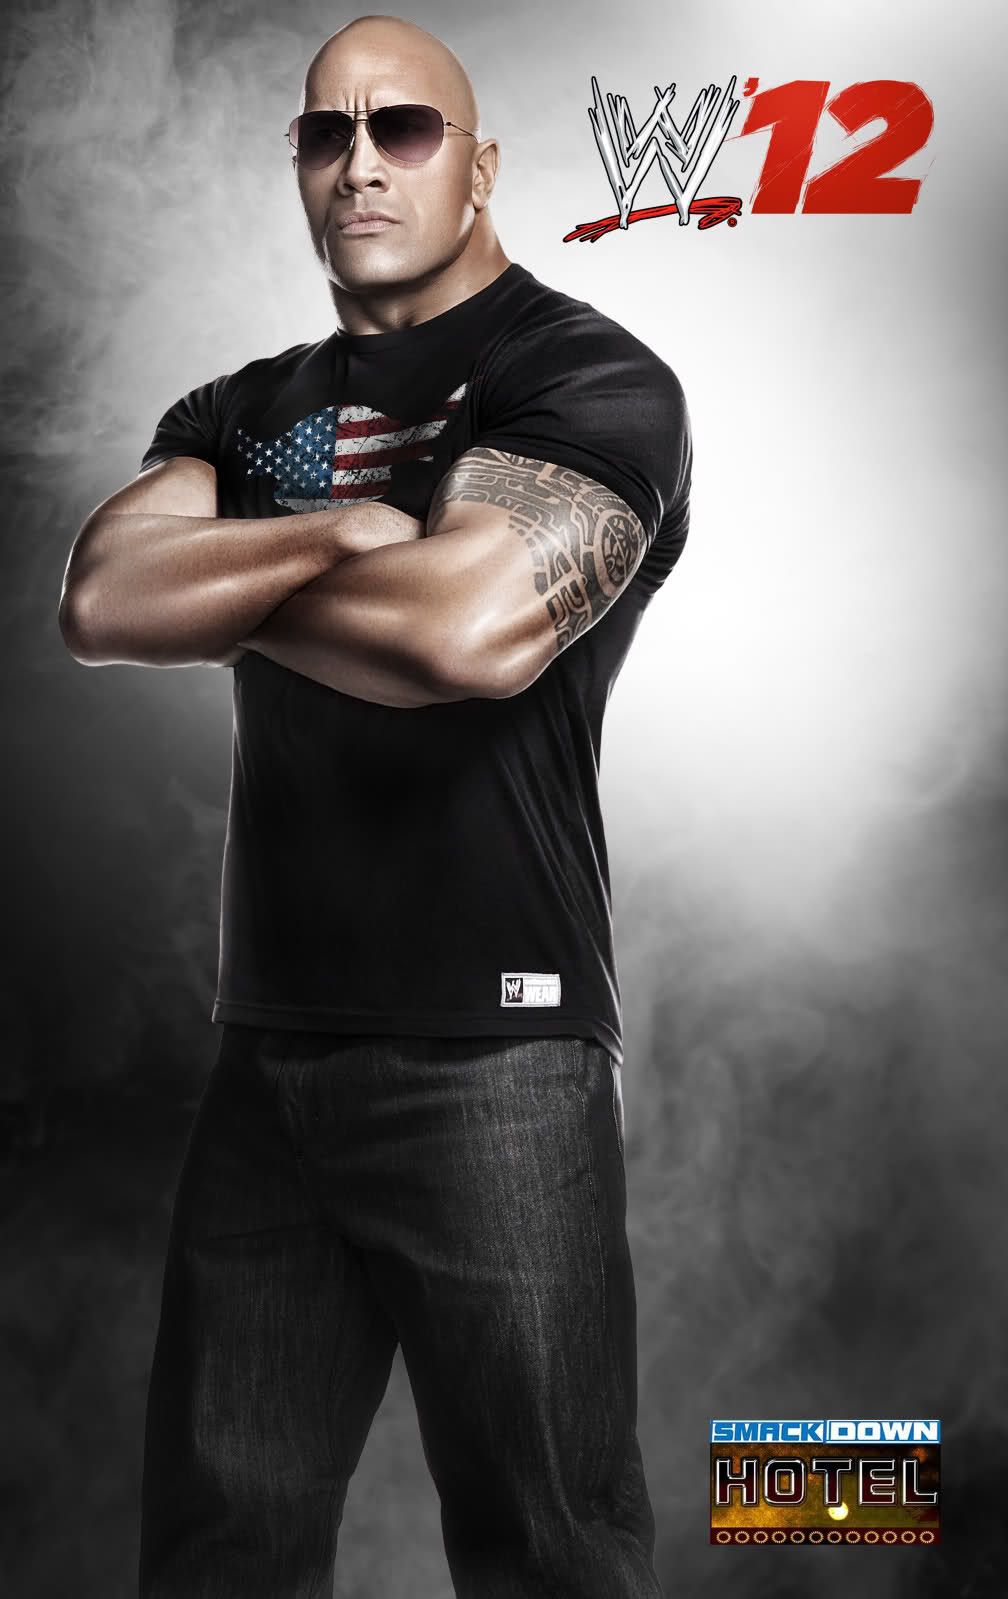 New WWE 12 The Rock Wallpaper - WWE 12 General Discussion